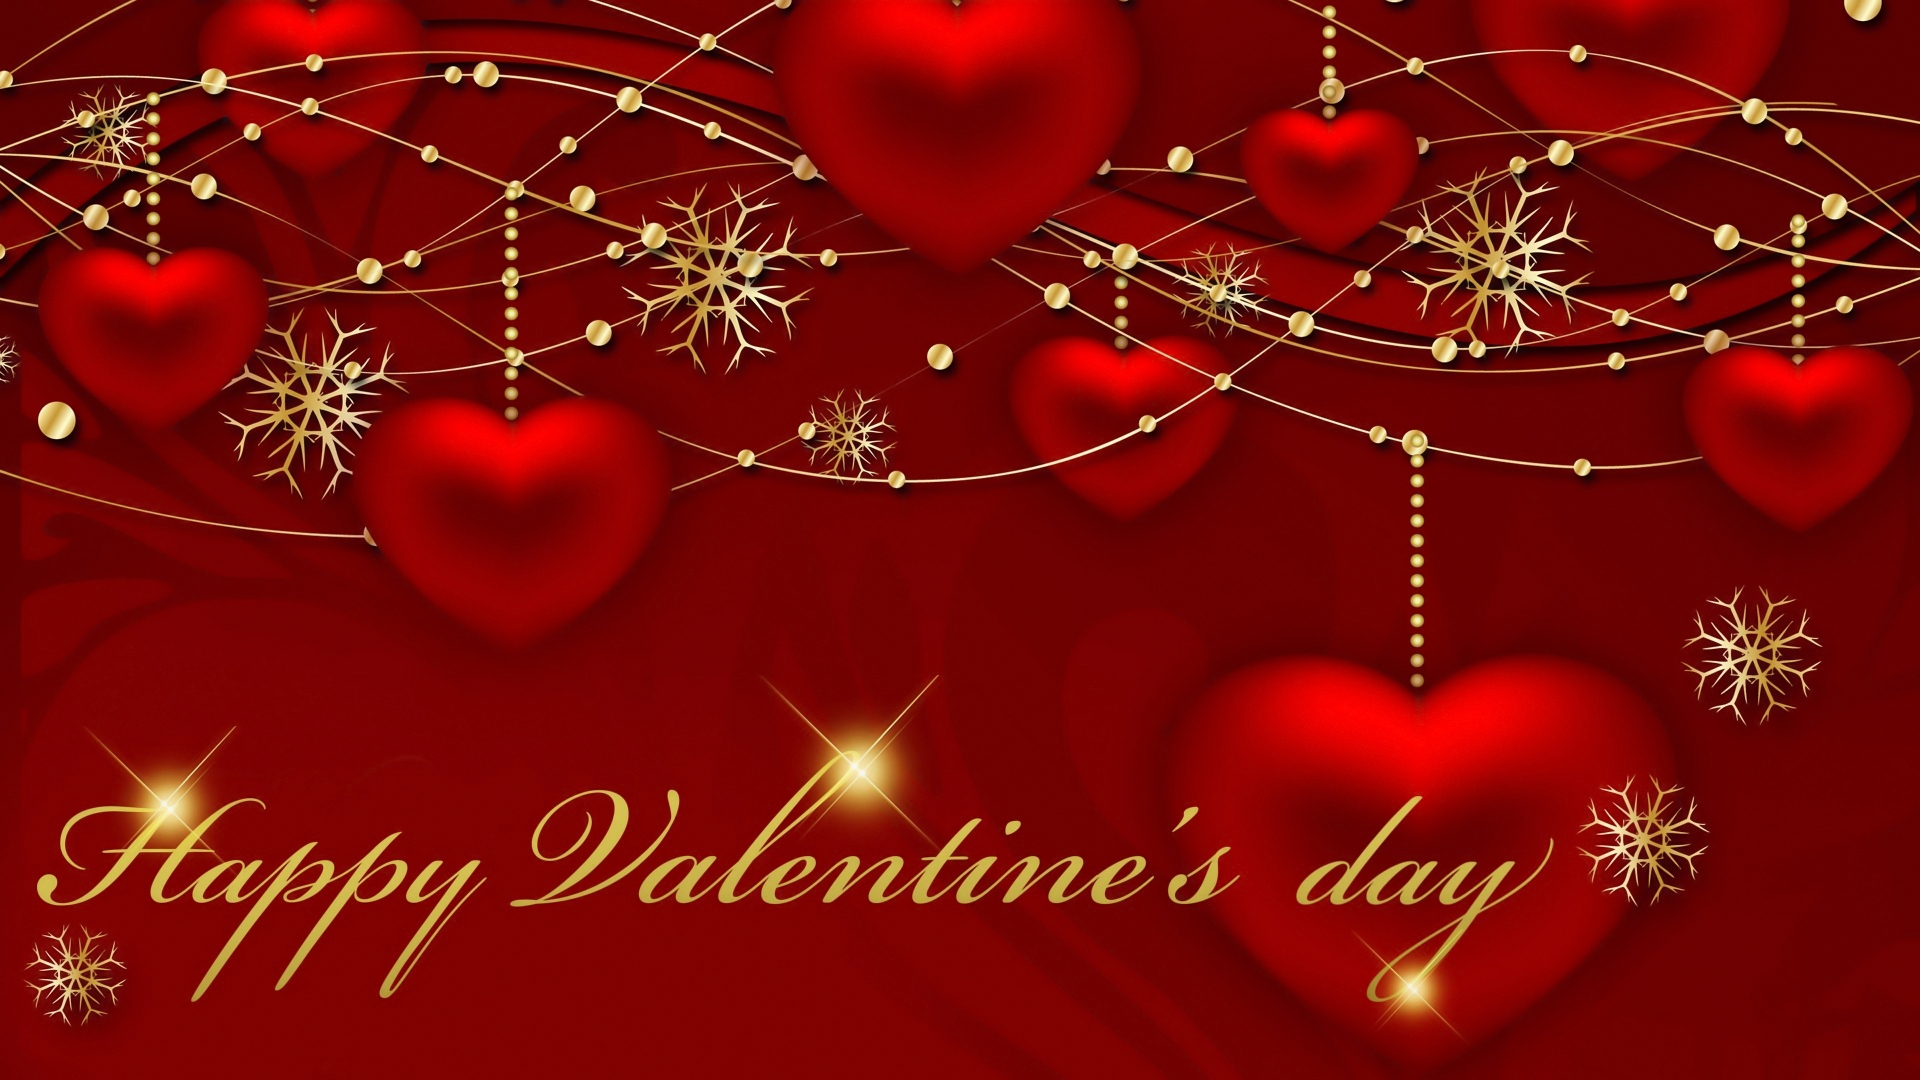 Greeting card with red hearts on Valentine's Day wallpapers and images ...